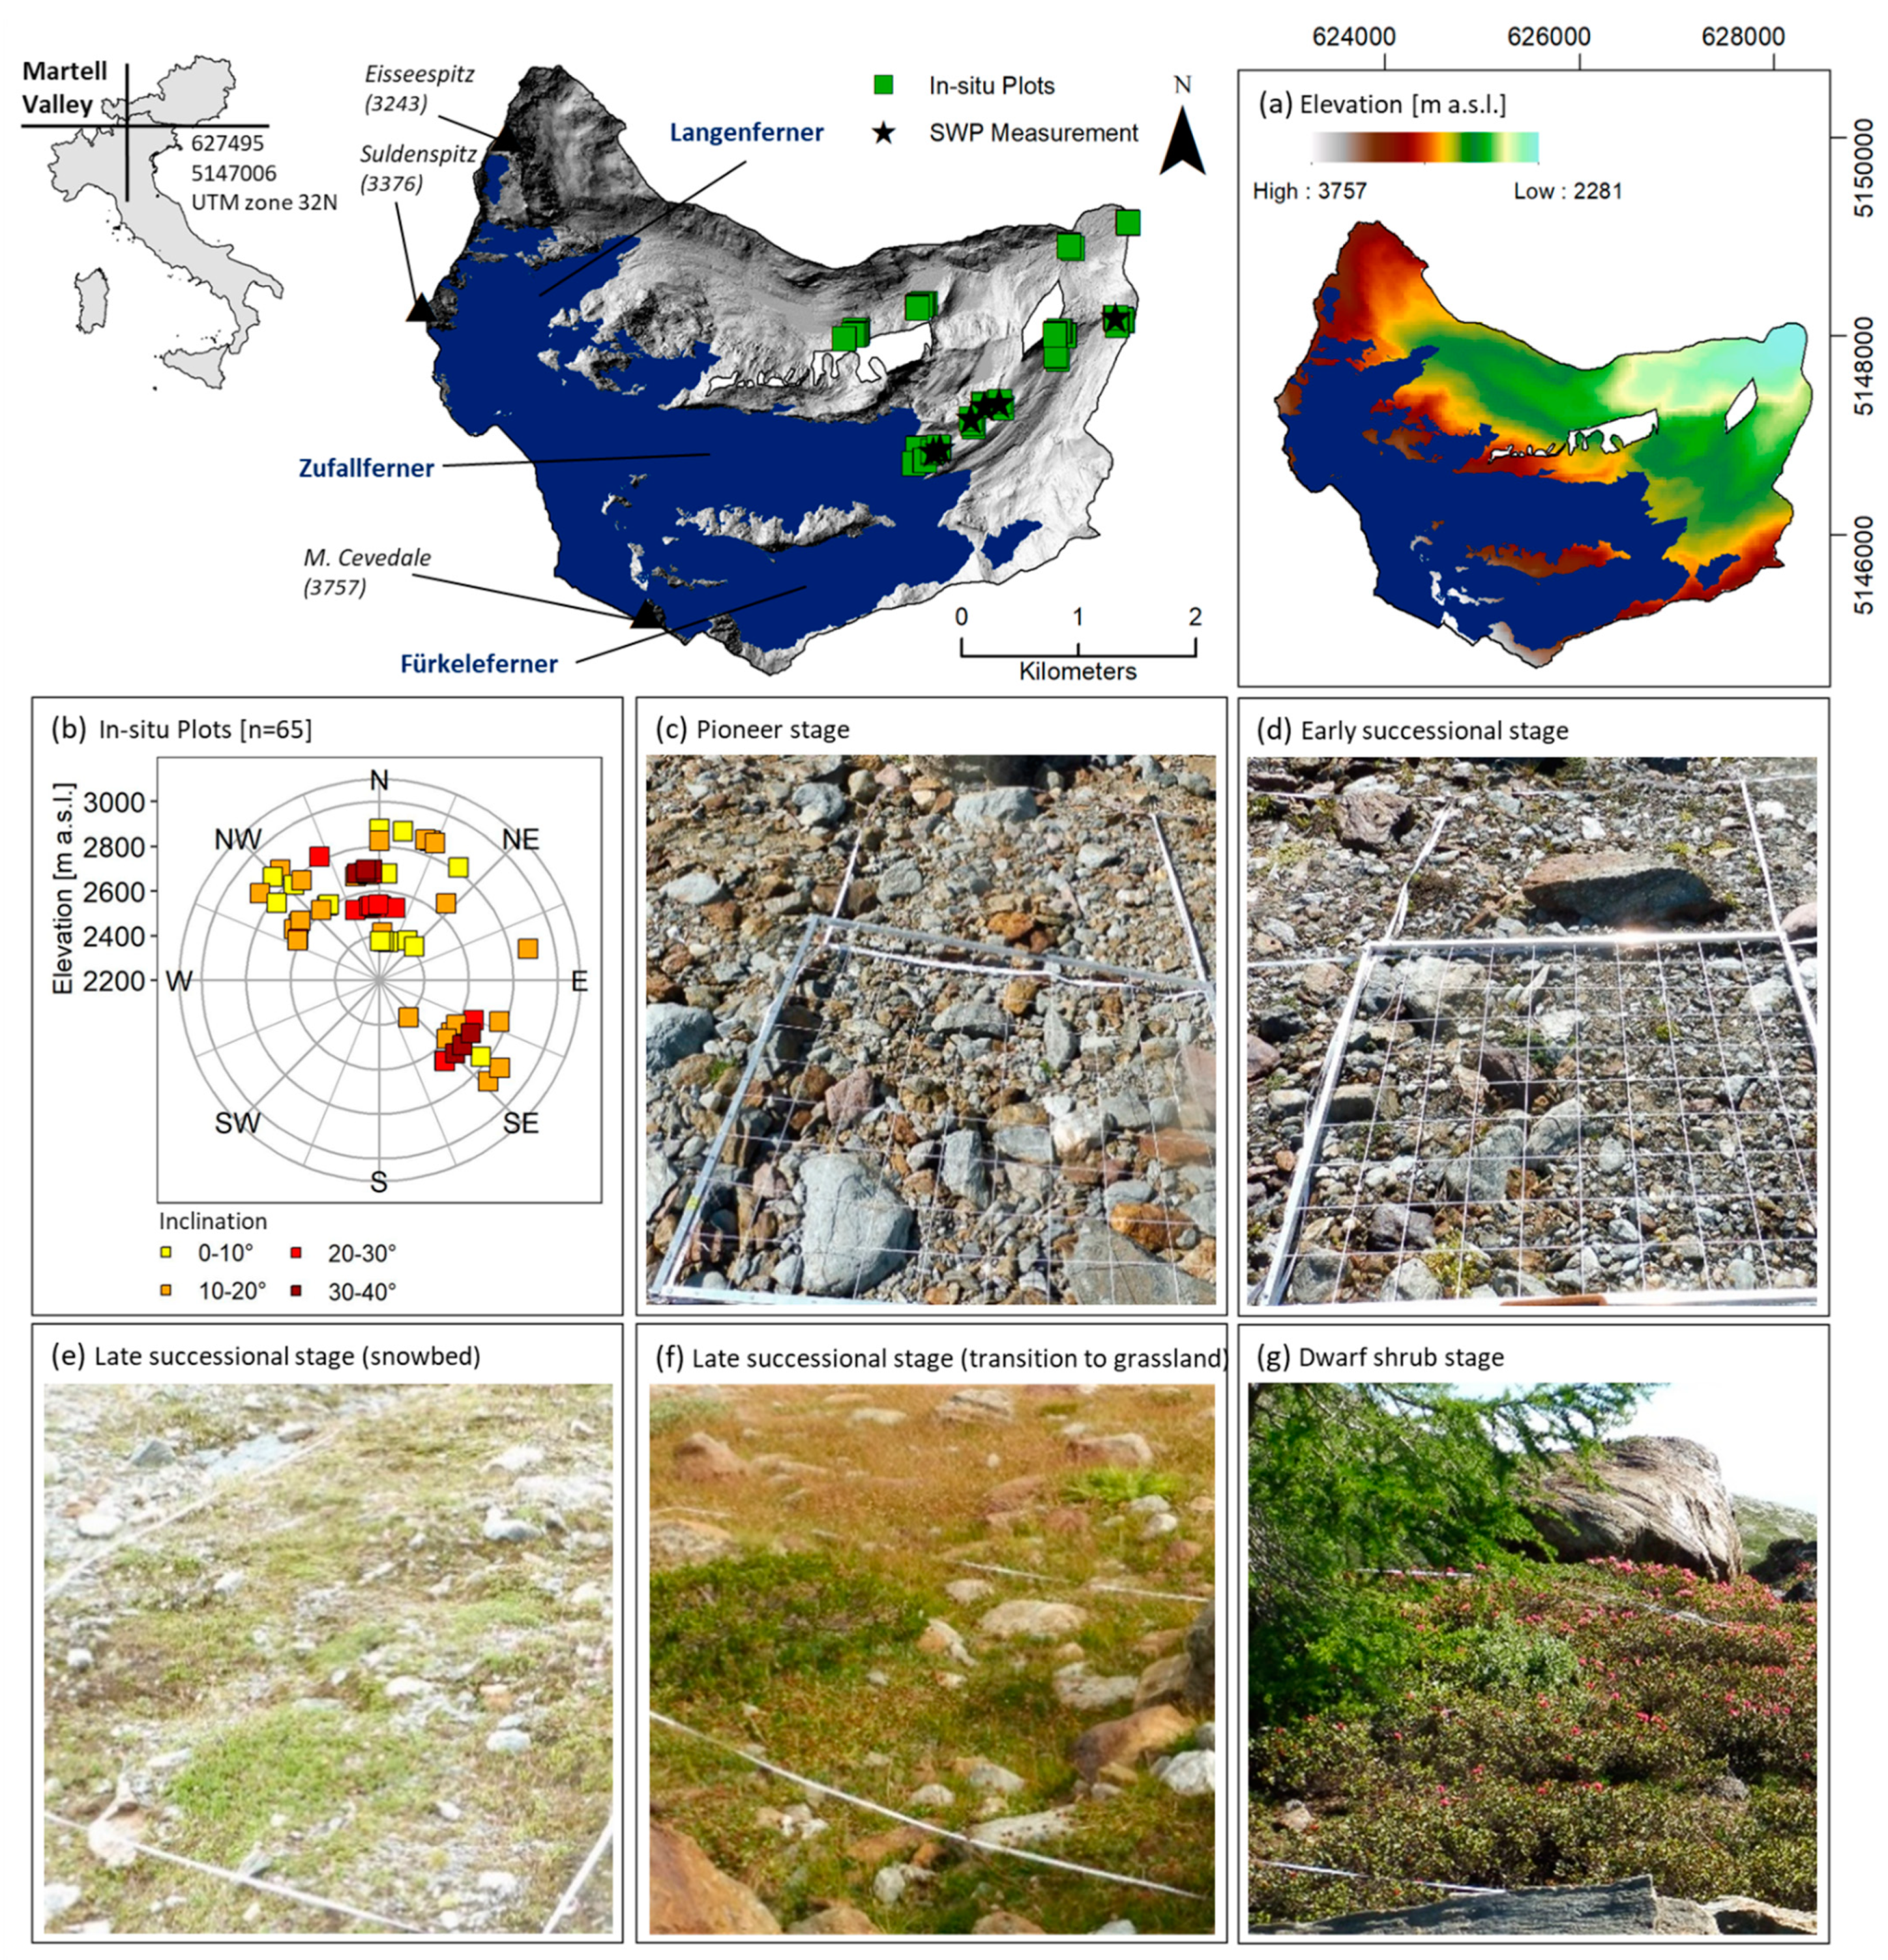 Remote Sensing | Free Full-Text | Modelling of Vegetation Dynamics from  Satellite Time Series to Determine Proglacial Primary Succession in the  Course of Global Warming—A Case Study in the Upper Martell Valley (